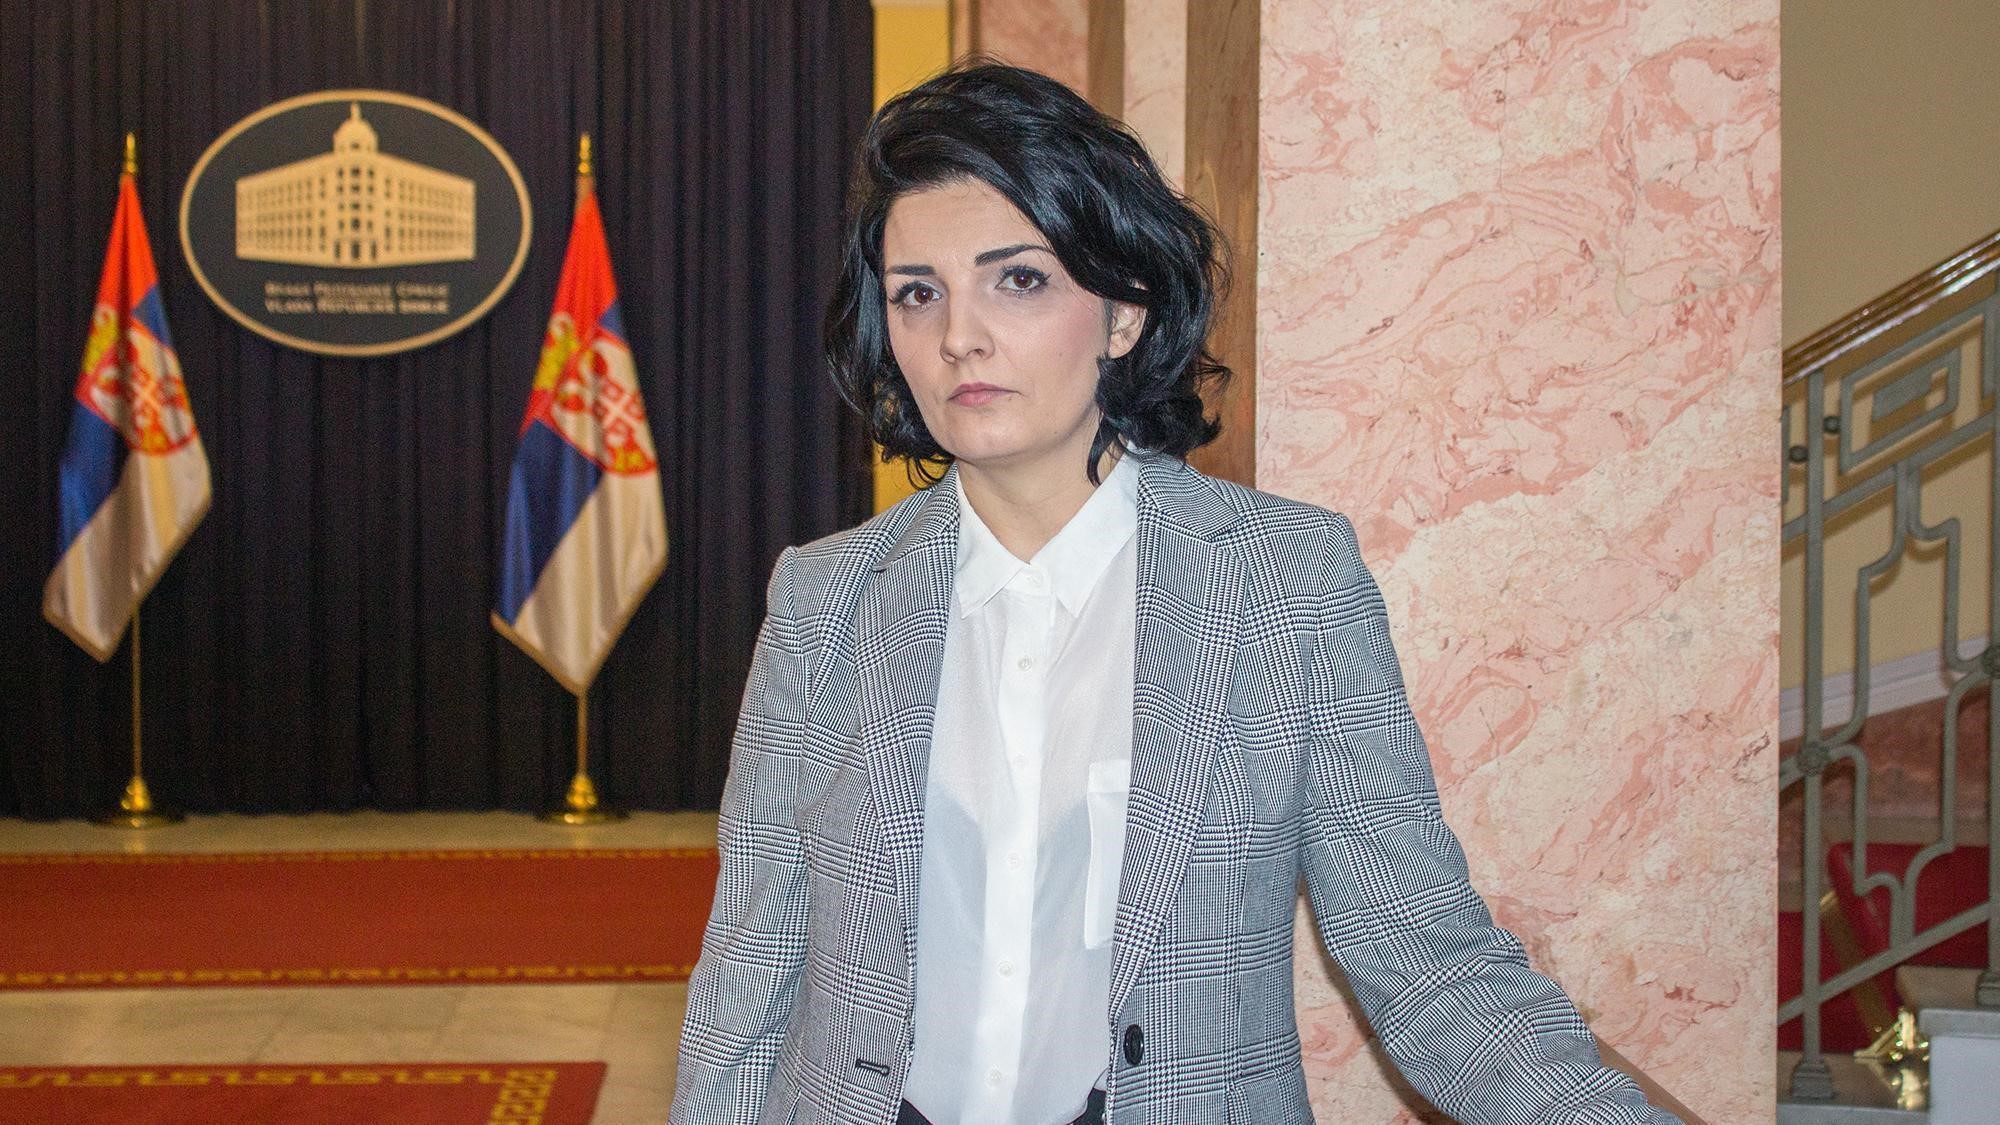 Milena Ivanovic Popovic, wife of the late Oliver Ivanovic, looks into the camera at the headquarters of the Serbian government in Belgrade. Photo: Stefan Milivojevic